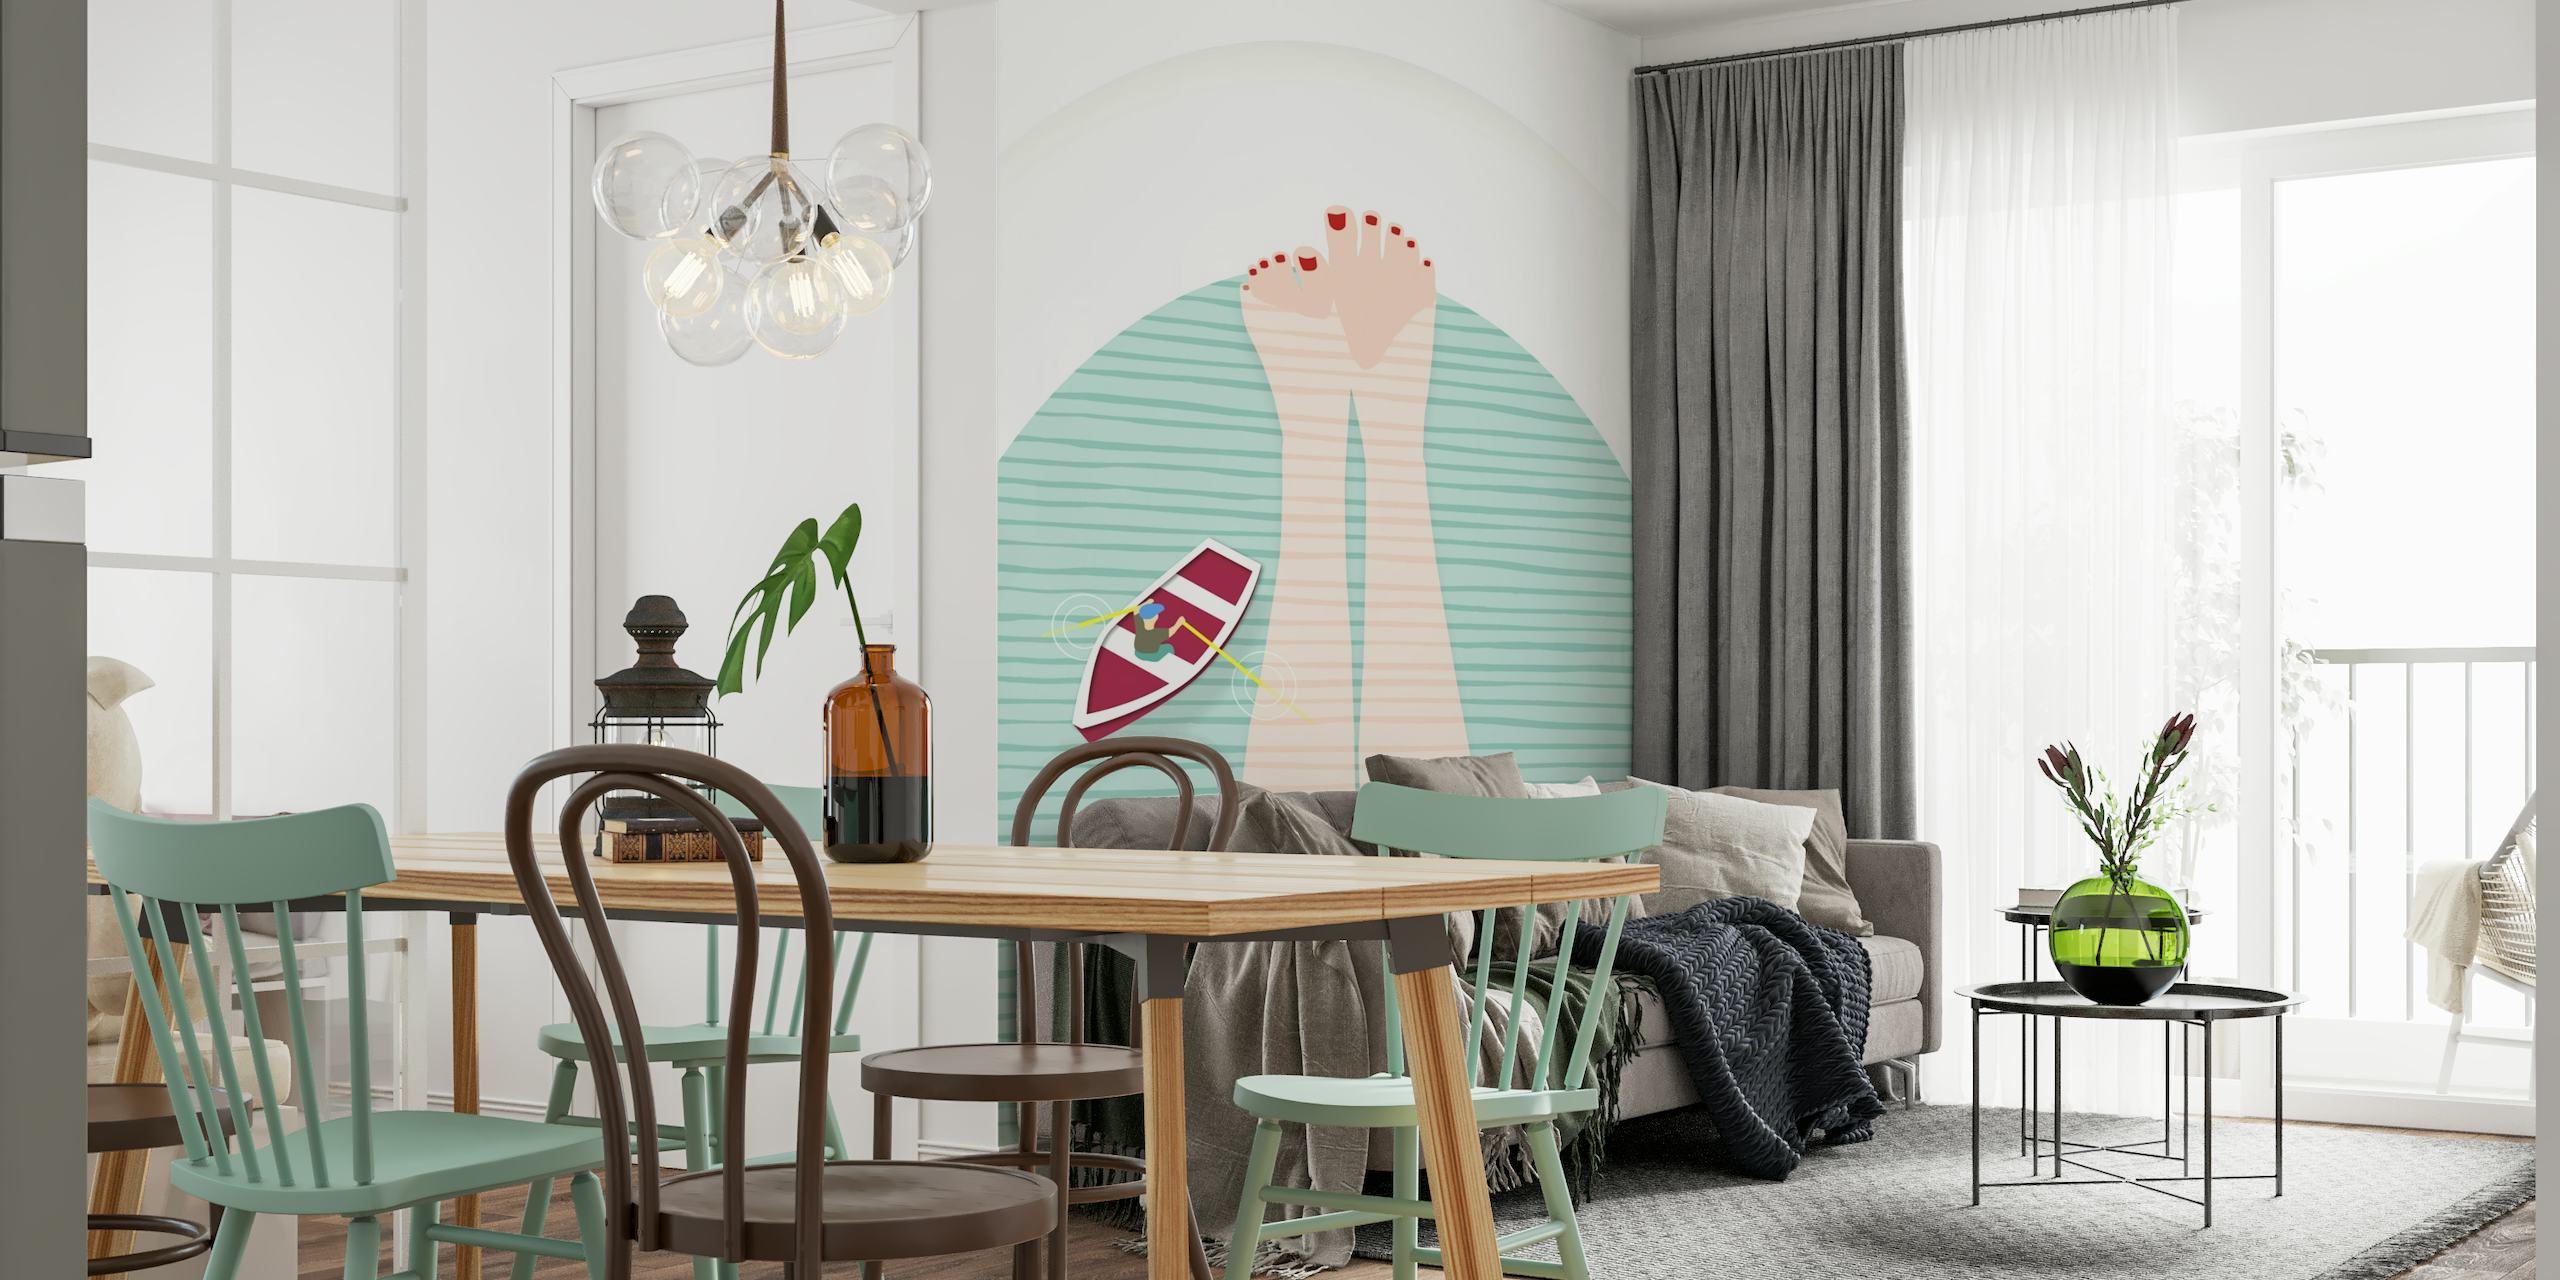 Illustrative wall mural of legs in a bathtub with a toy boat and striped flooring